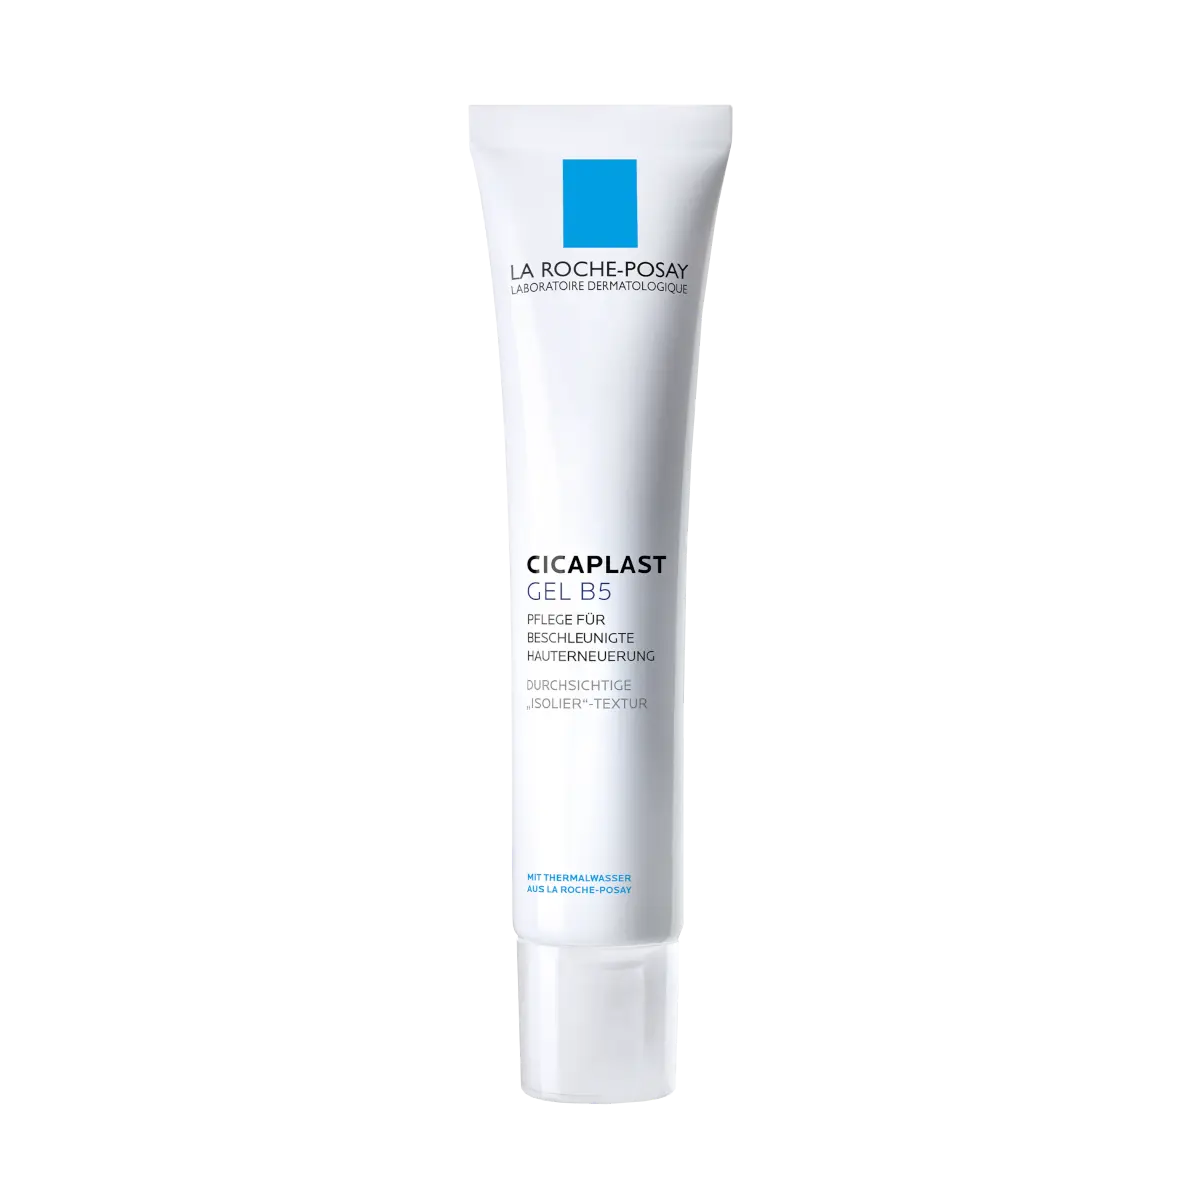 La Roche Posay ProductPage Sun Anthelios XL Invisible Mist Ultra Light